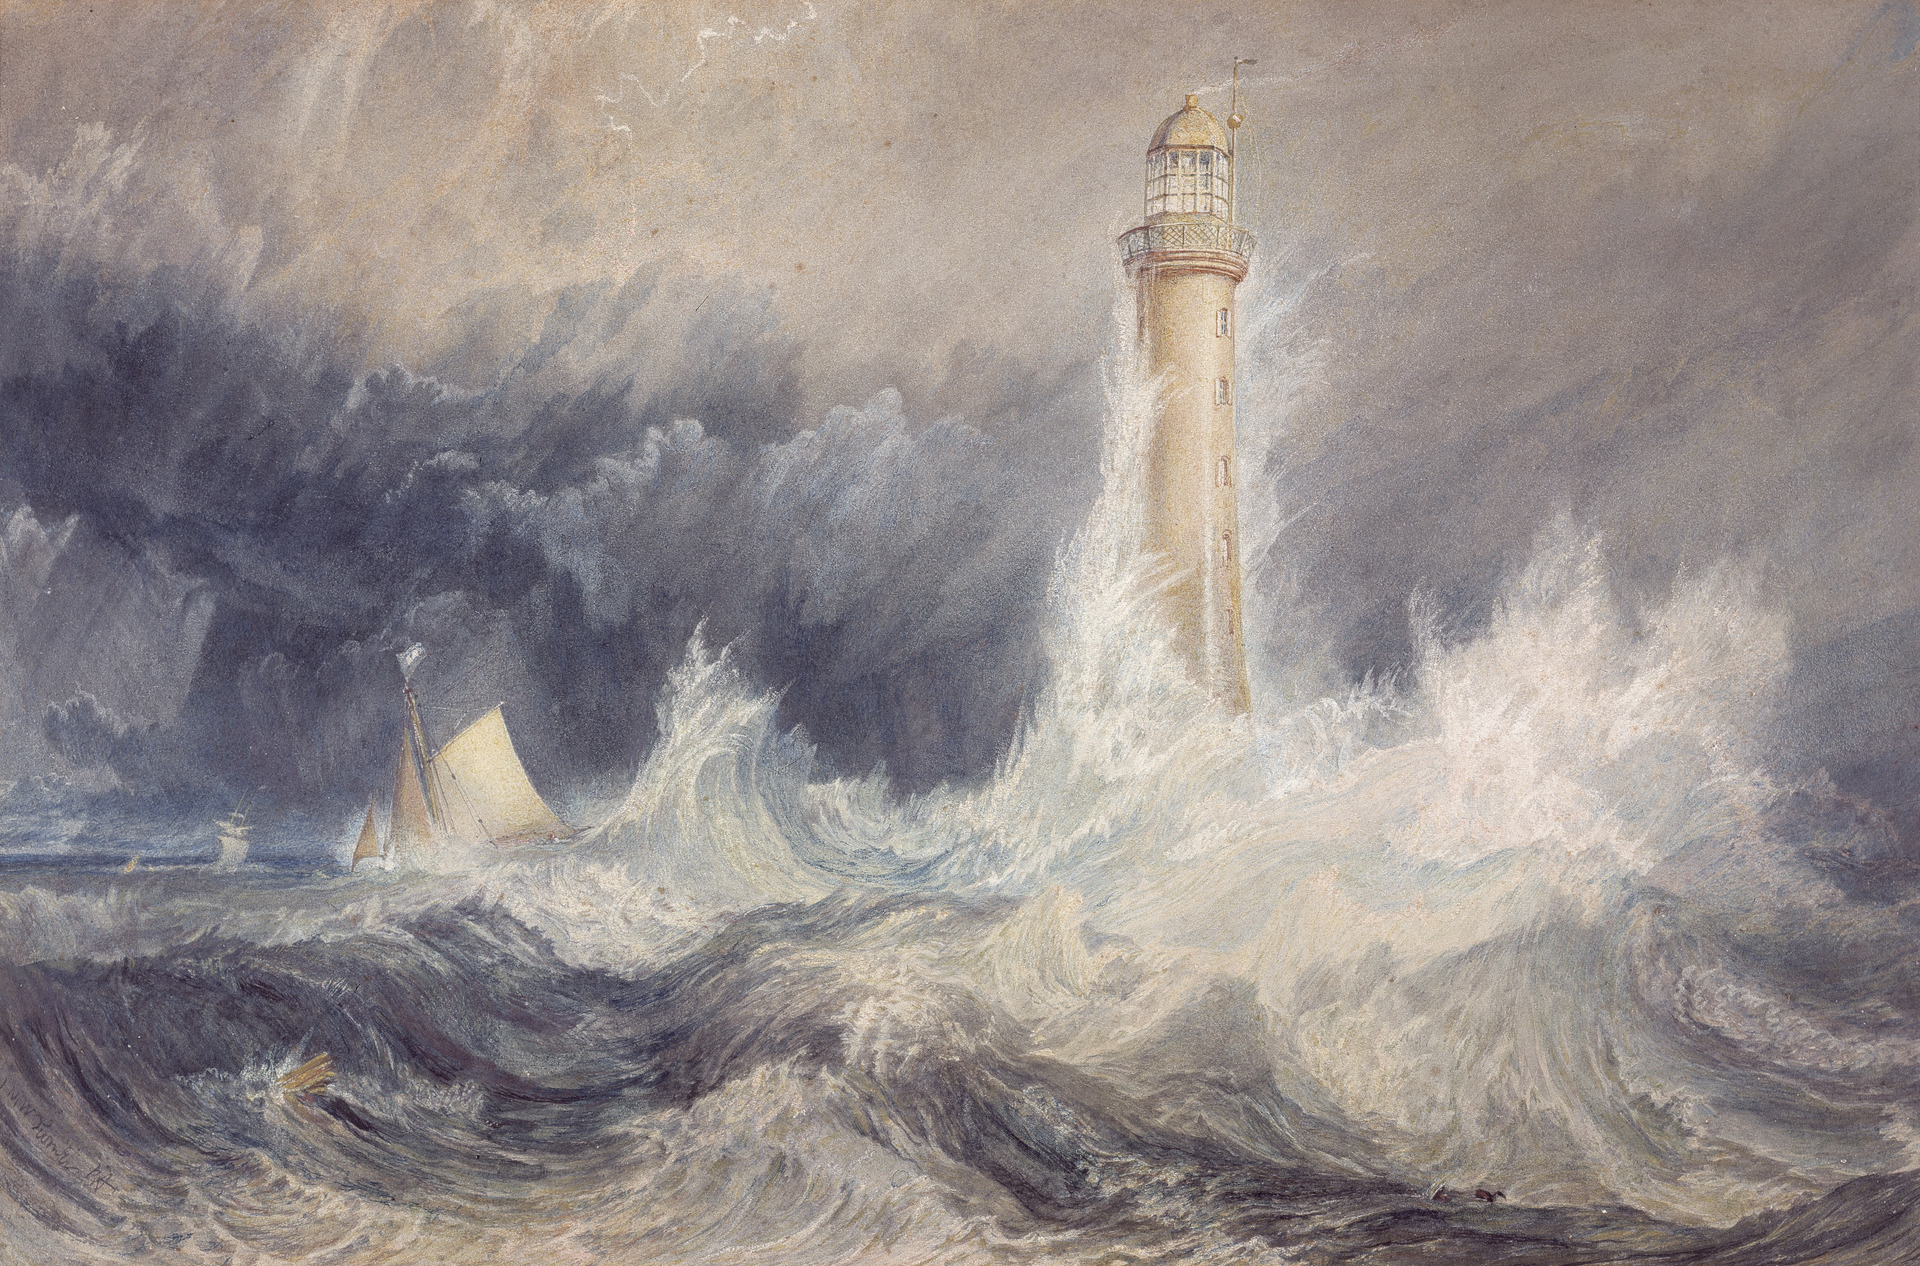 Painting of the Bell Rock Lighthouse in a storm